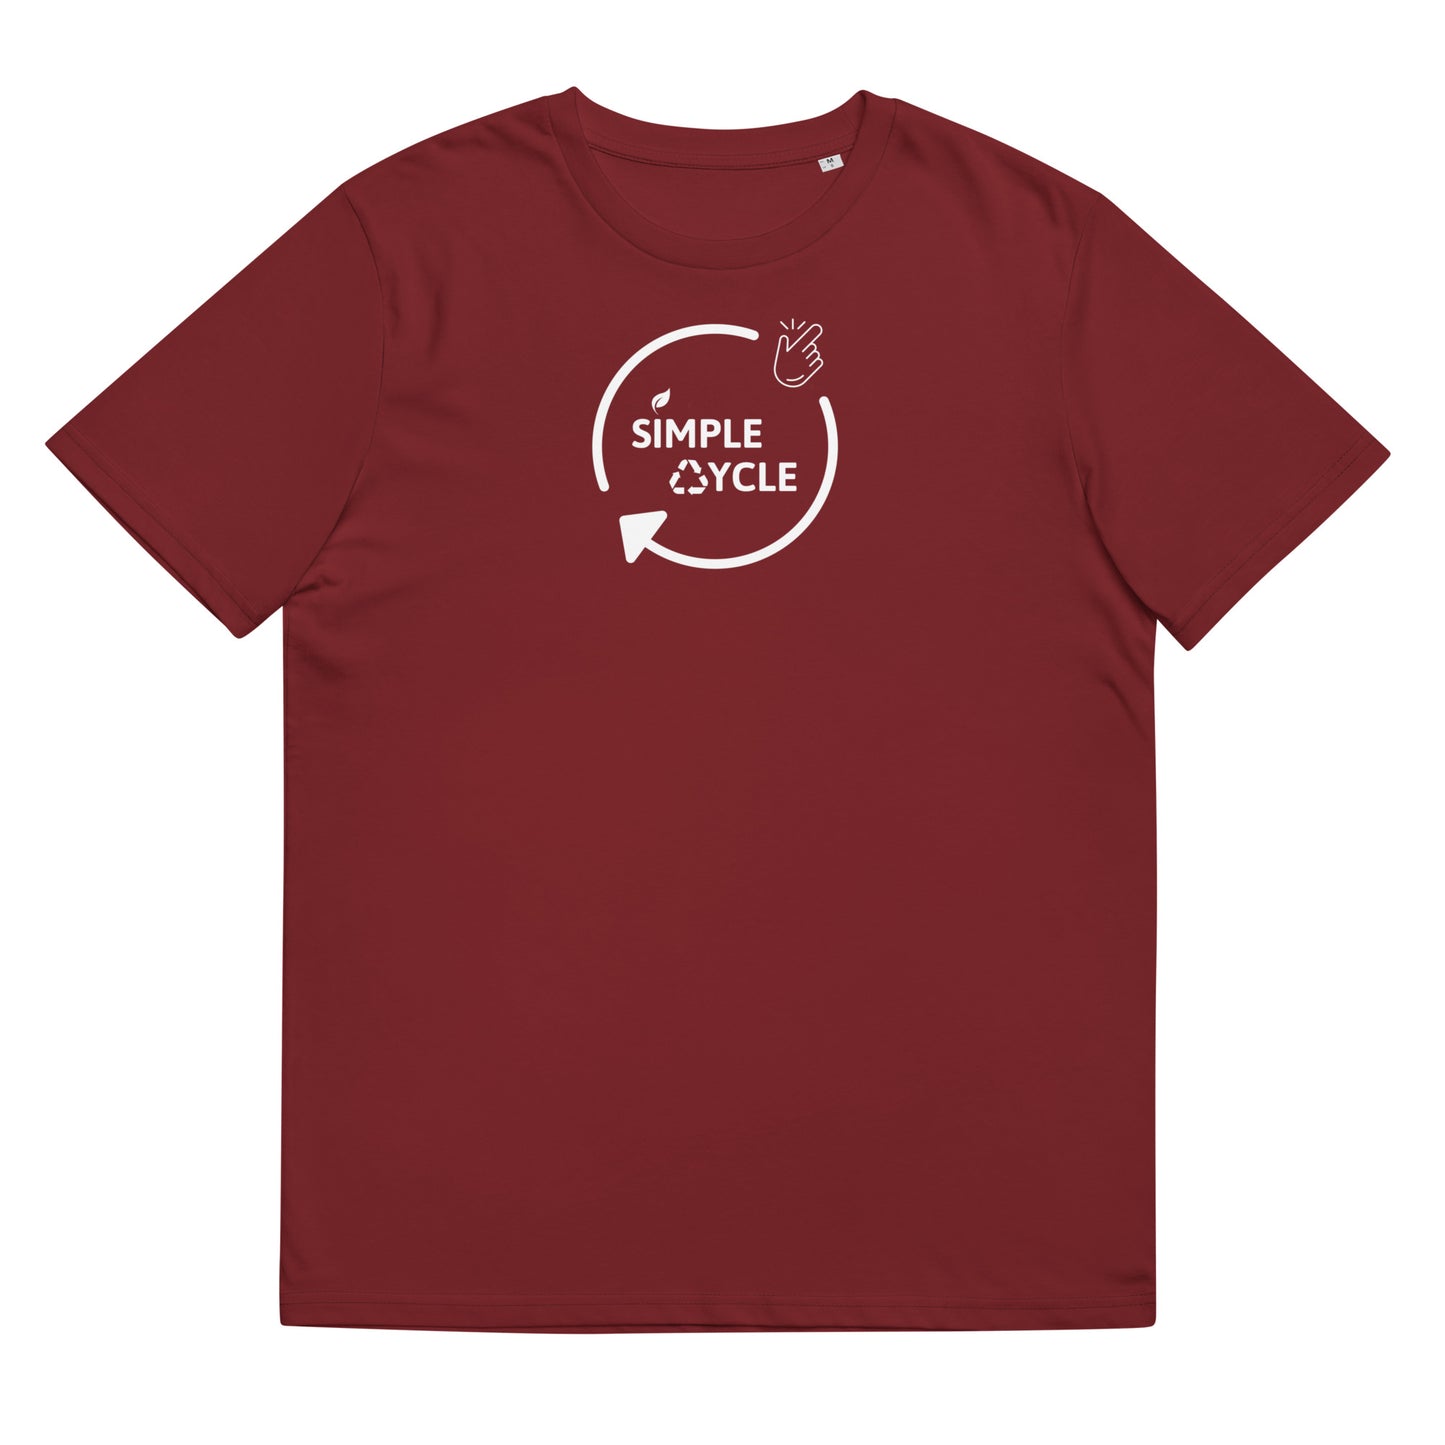 SimpleCycle Unisex Organic Cotton T-Shirt red front view